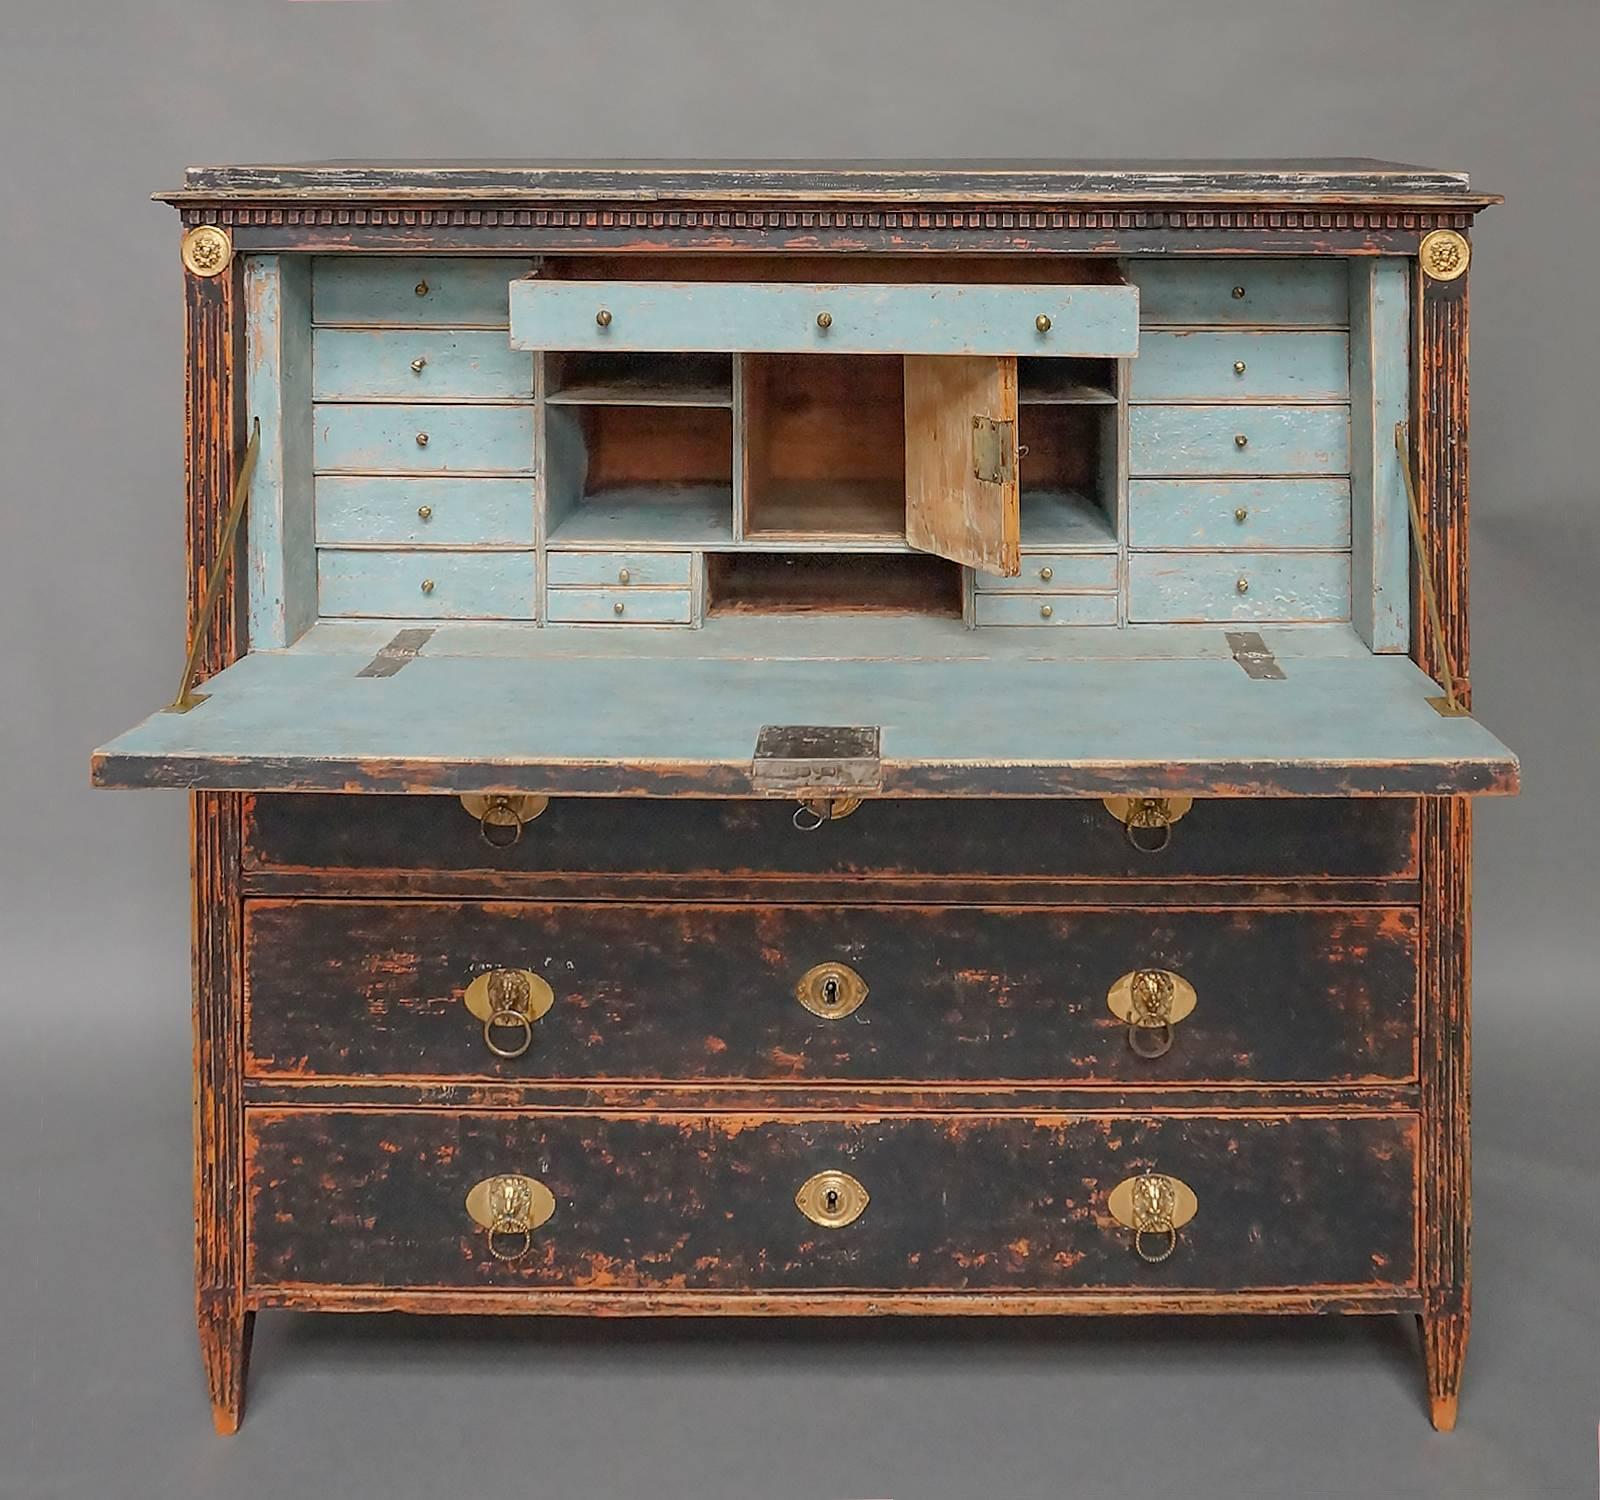 Swedish fall-front secretaire from the Gustavian period, circa 1800. Constructed in two parts, the upper section is fitted with fifteen drawers, several open compartments, and one storage area with reeded door. There are brass medallions with